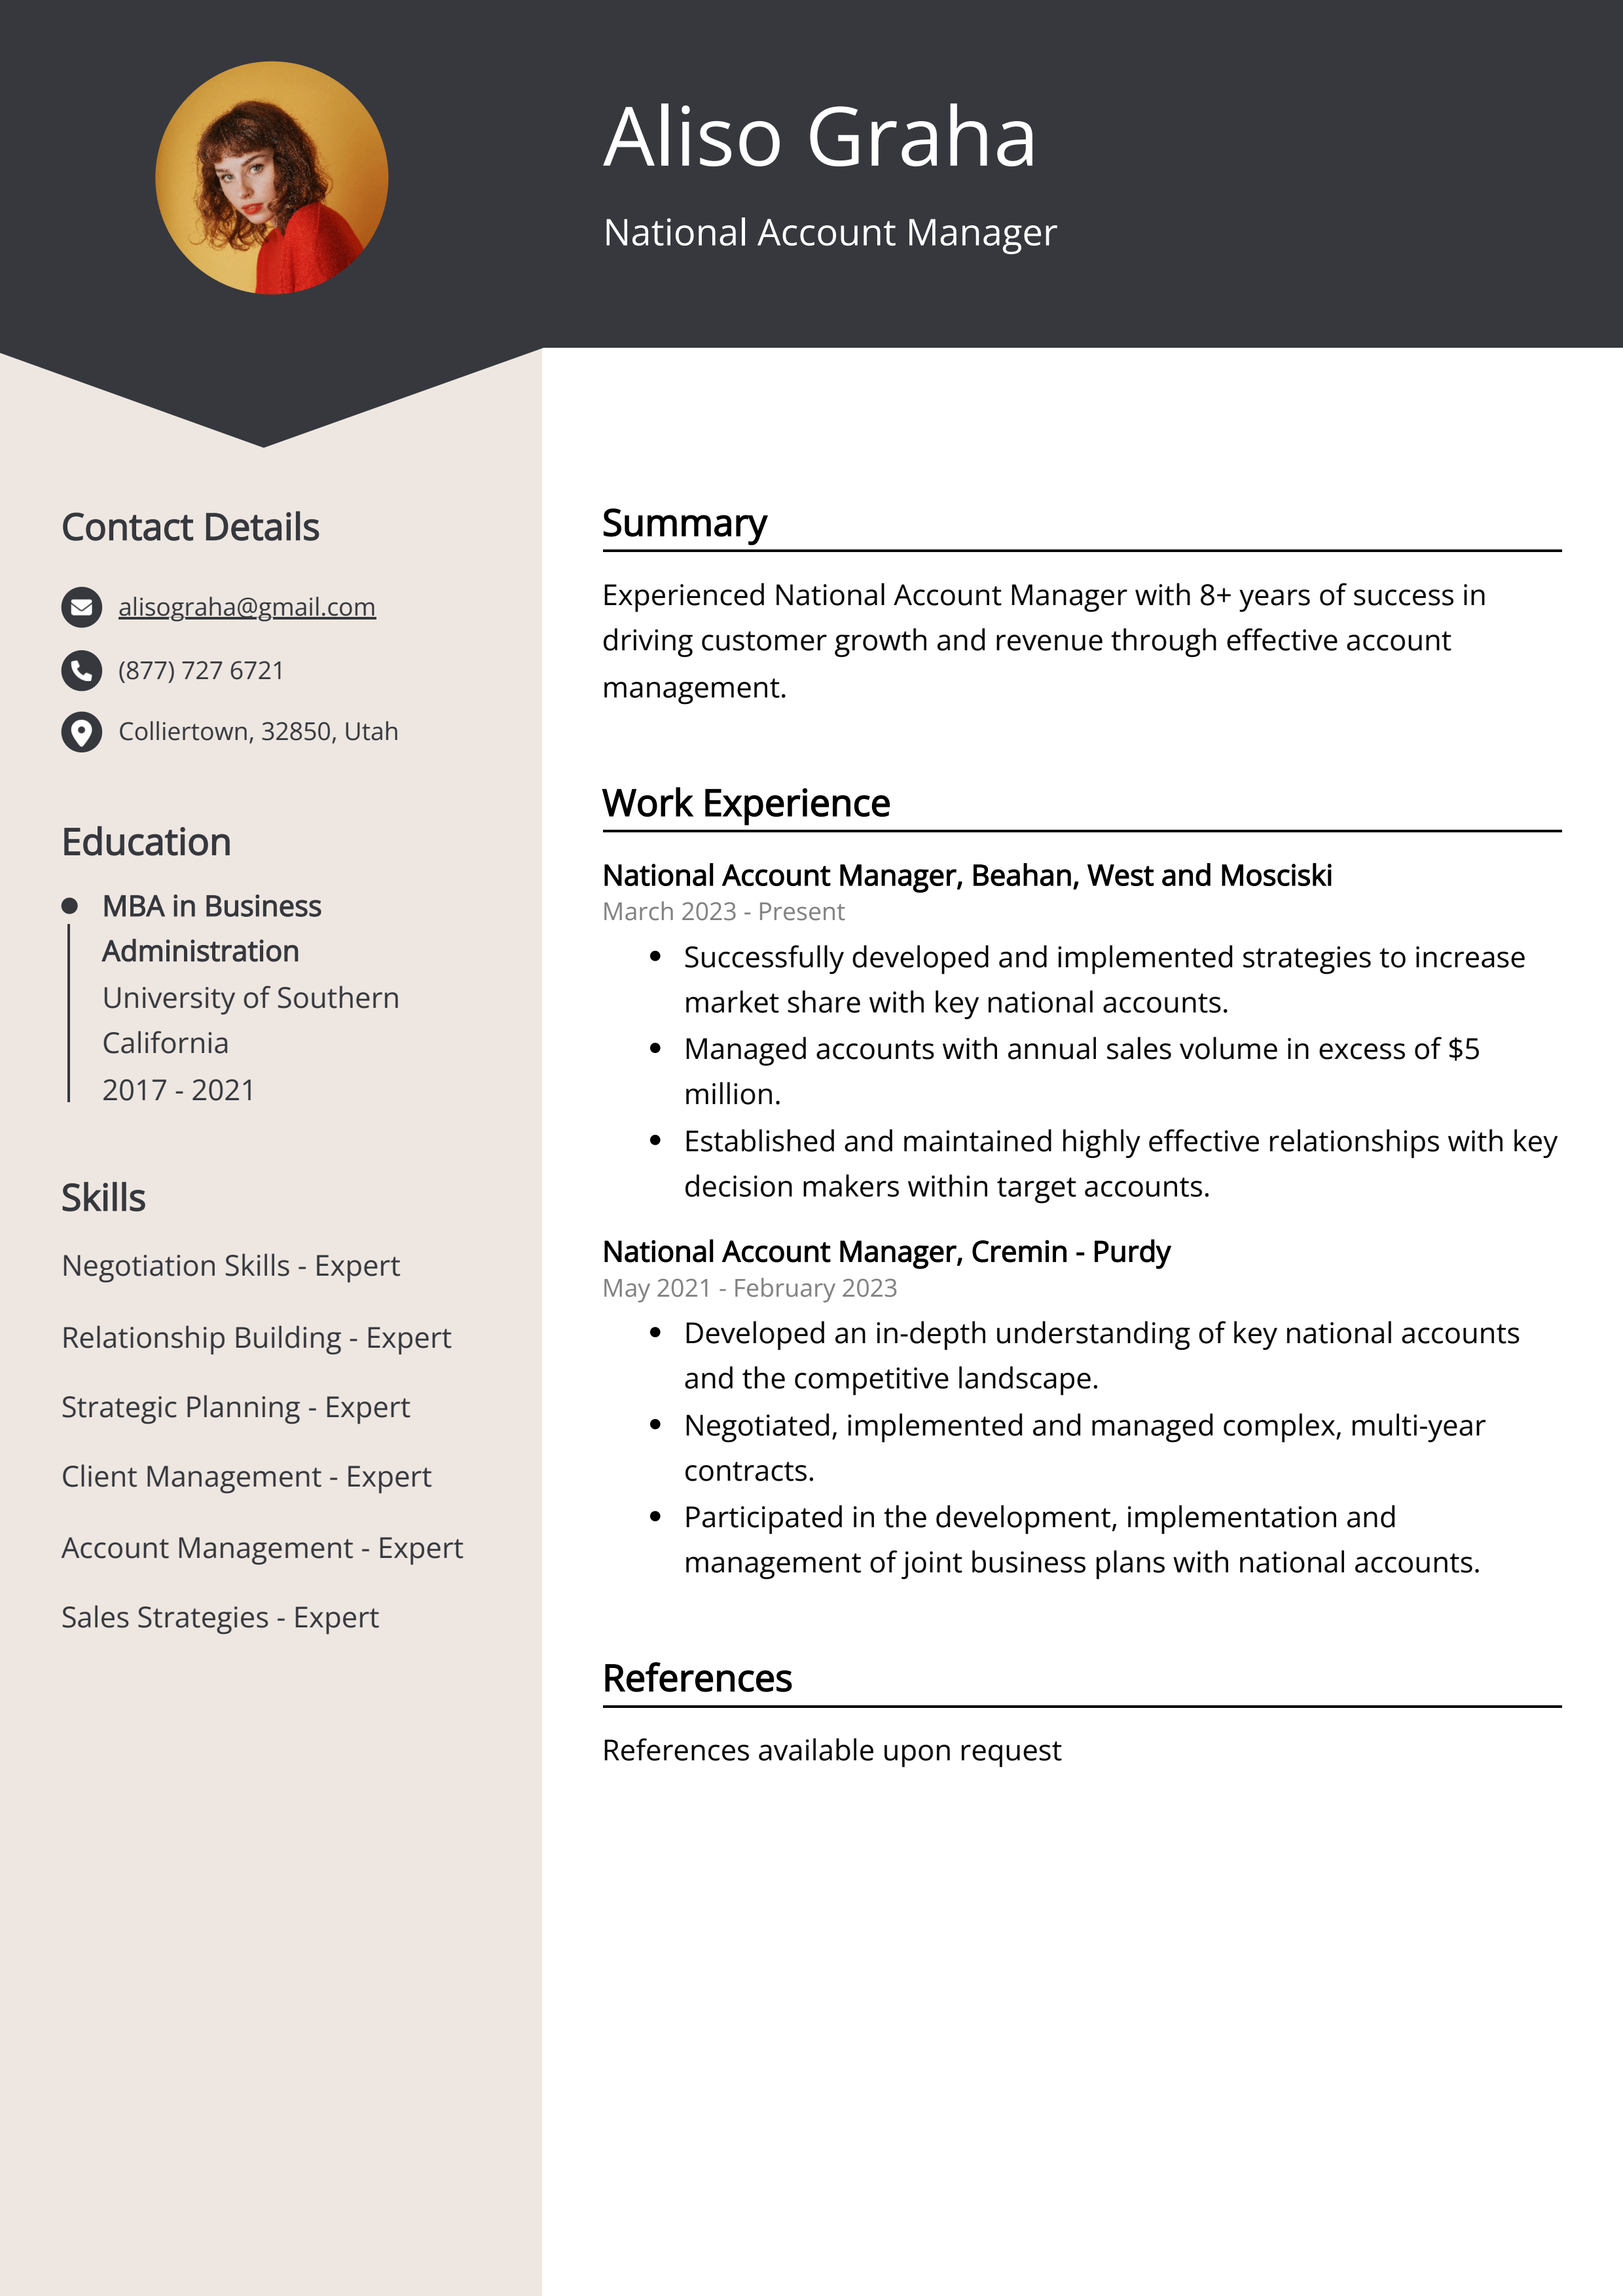 National Account Manager CV Example